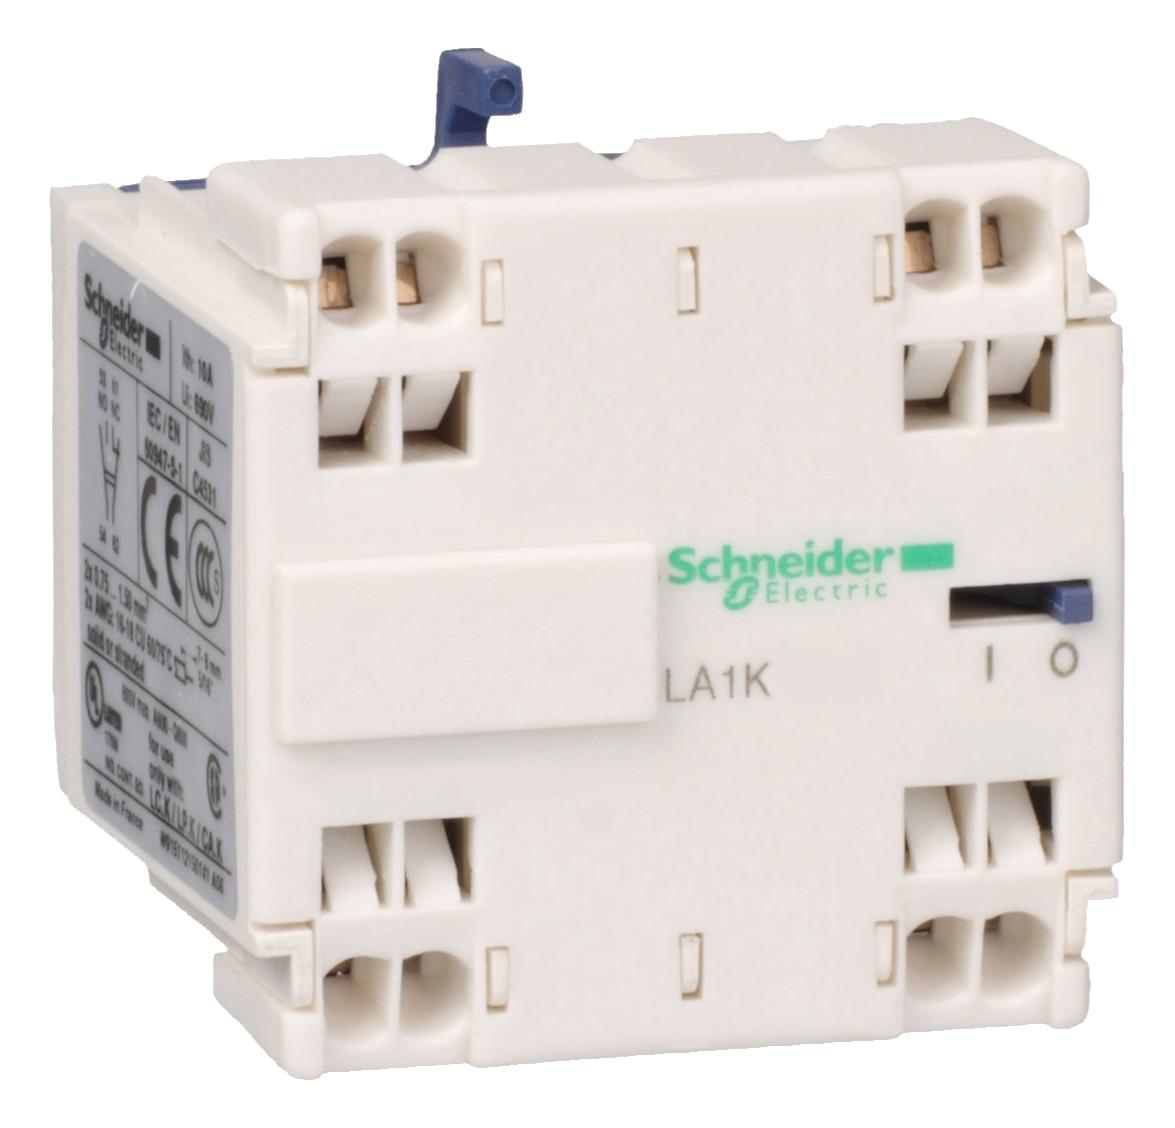 LA1KN203 AUXILIARY CONTACTS SCHNEIDER ELECTRIC